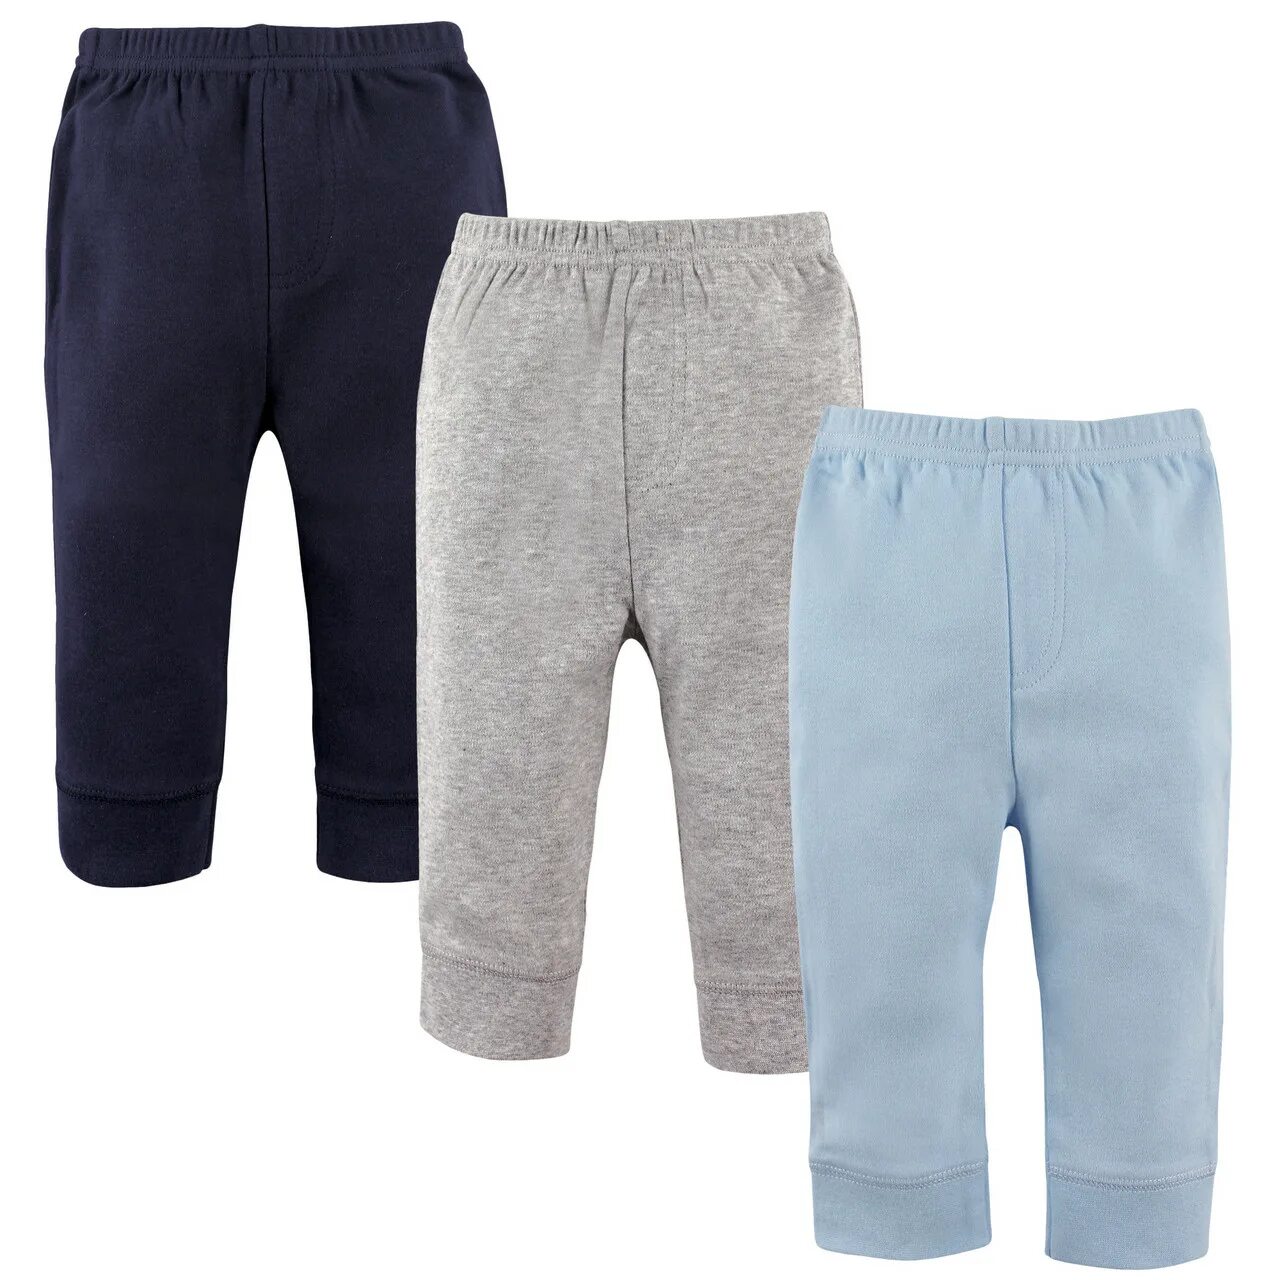 Брюки Luvable friends. Бриджи Luvable friends. Regular Pants for boys. Poetry Pants Baby by Green Cotton.